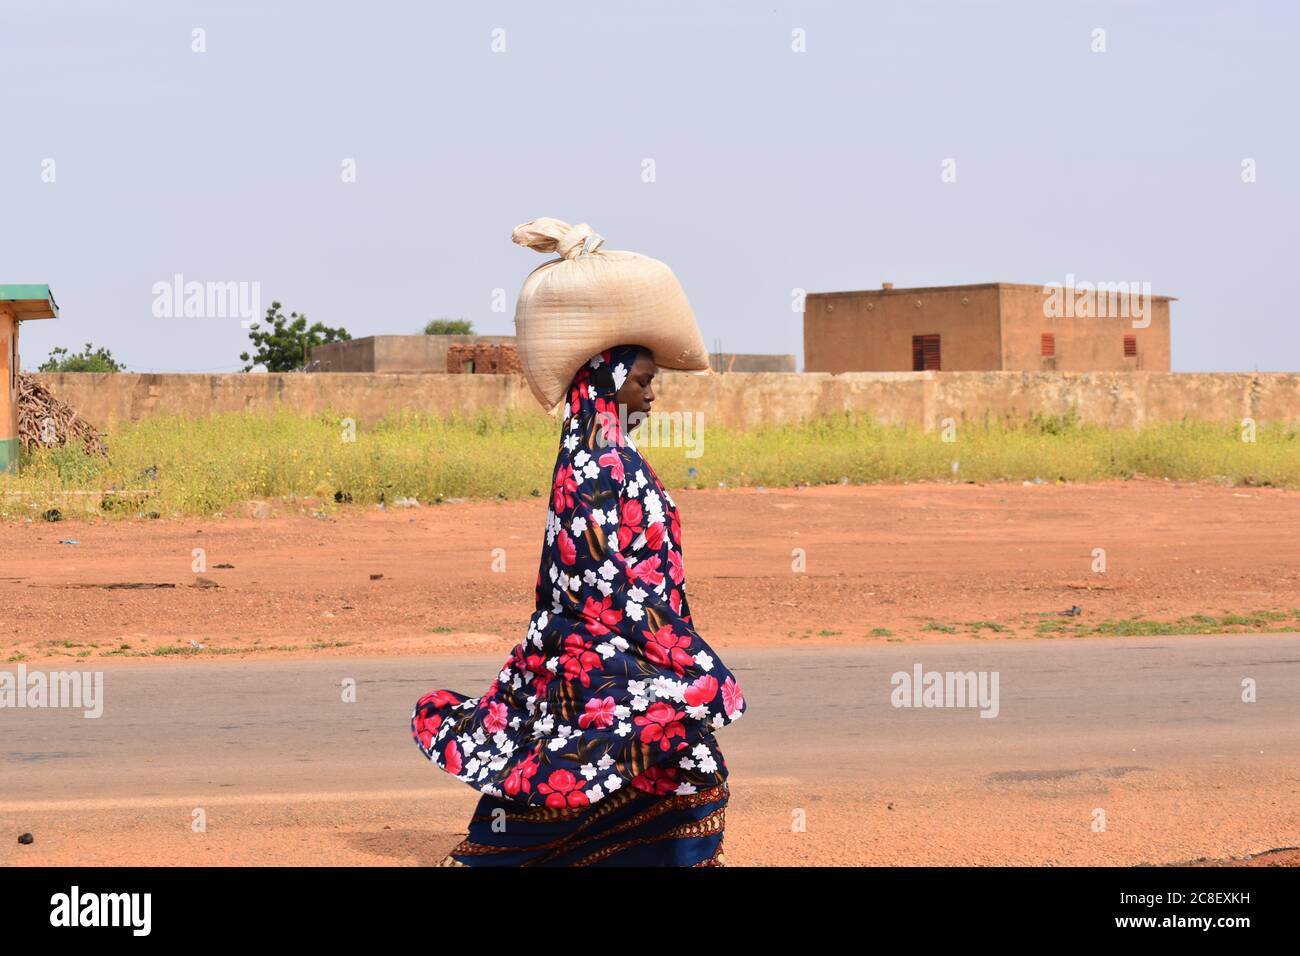 An African woman carrying a full sack on her head Stock Photo